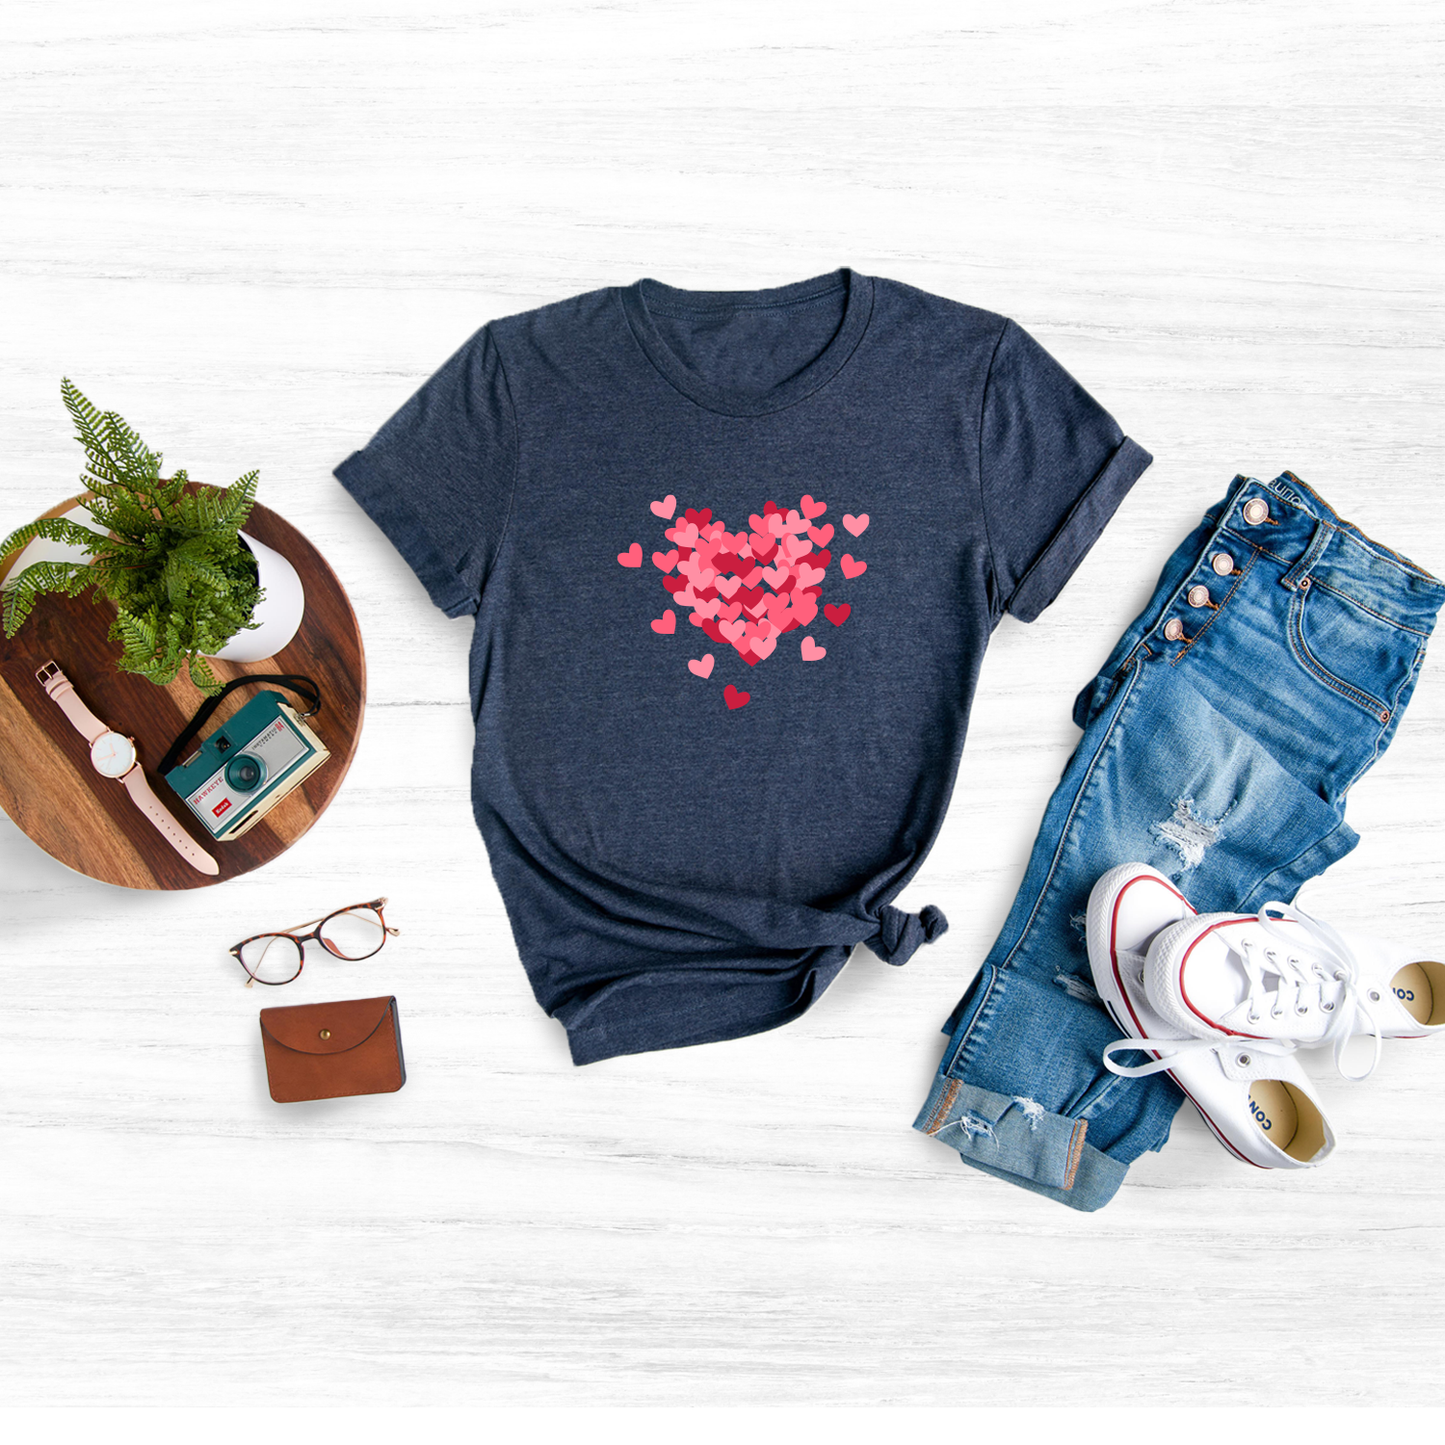 Celebrate love and femininity with this unique and eye-catching double heart tee.